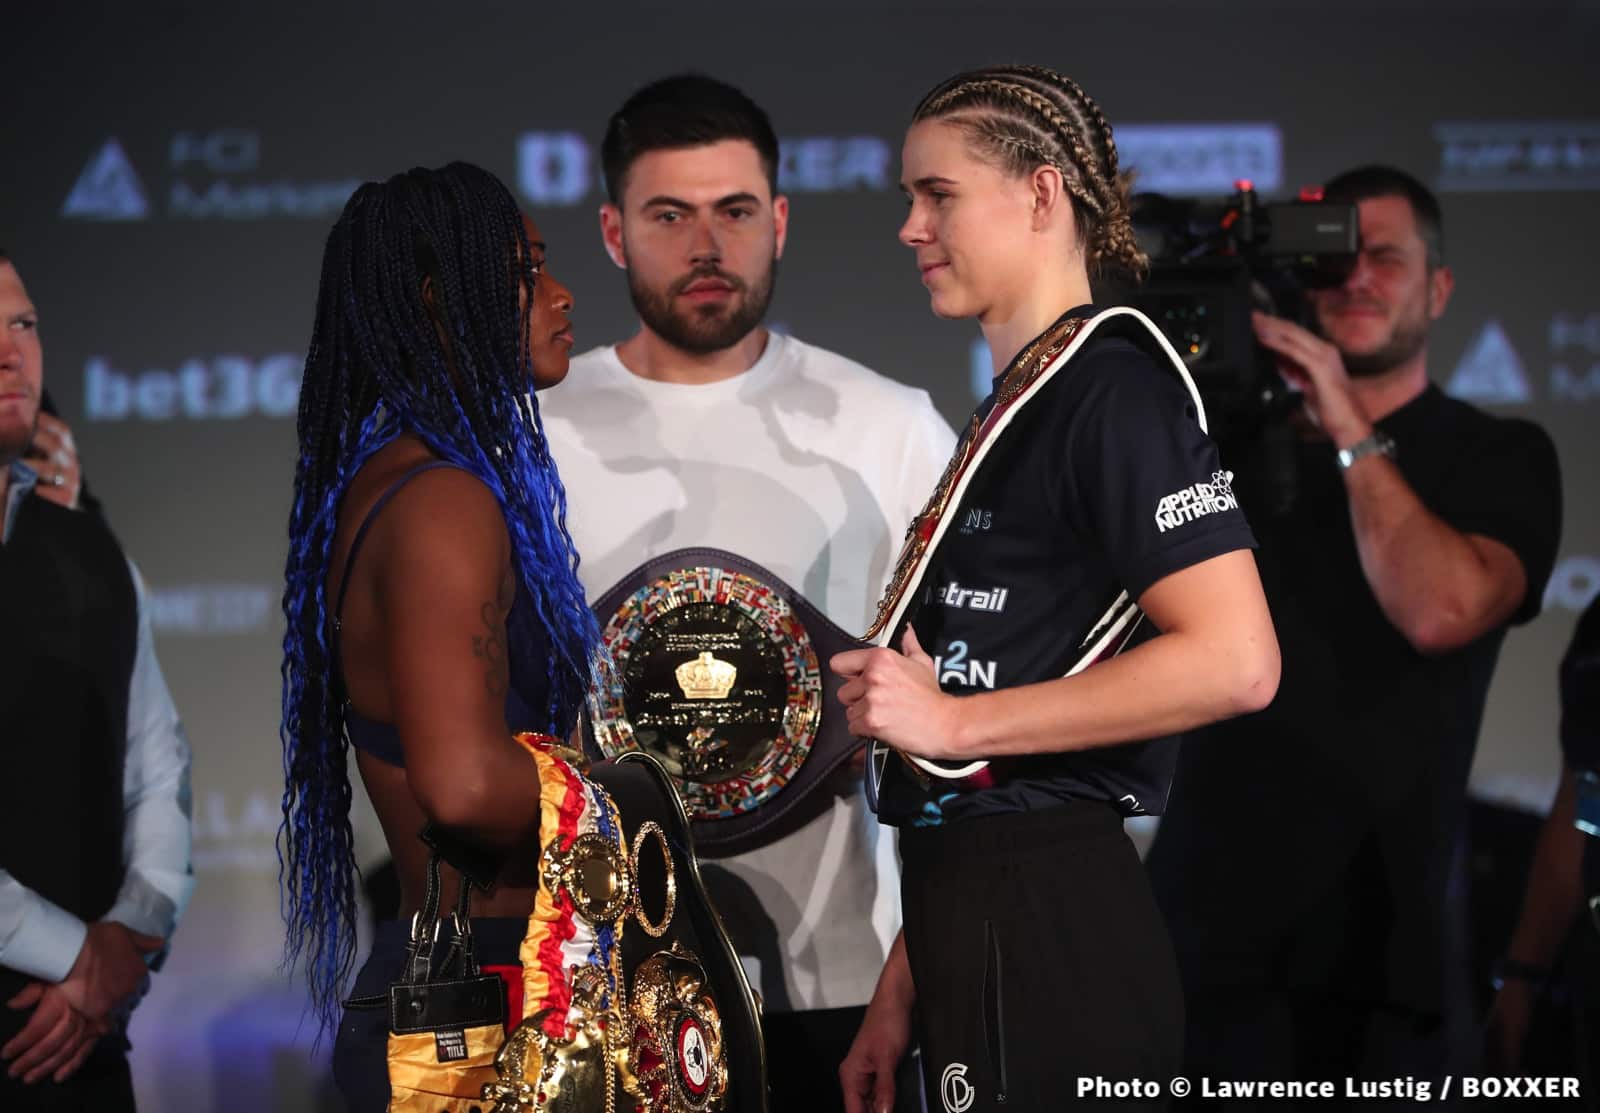 Shields vs Marshall, Mayer vs Baumgardner Weigh-In Proves To Be A Tense Affair!